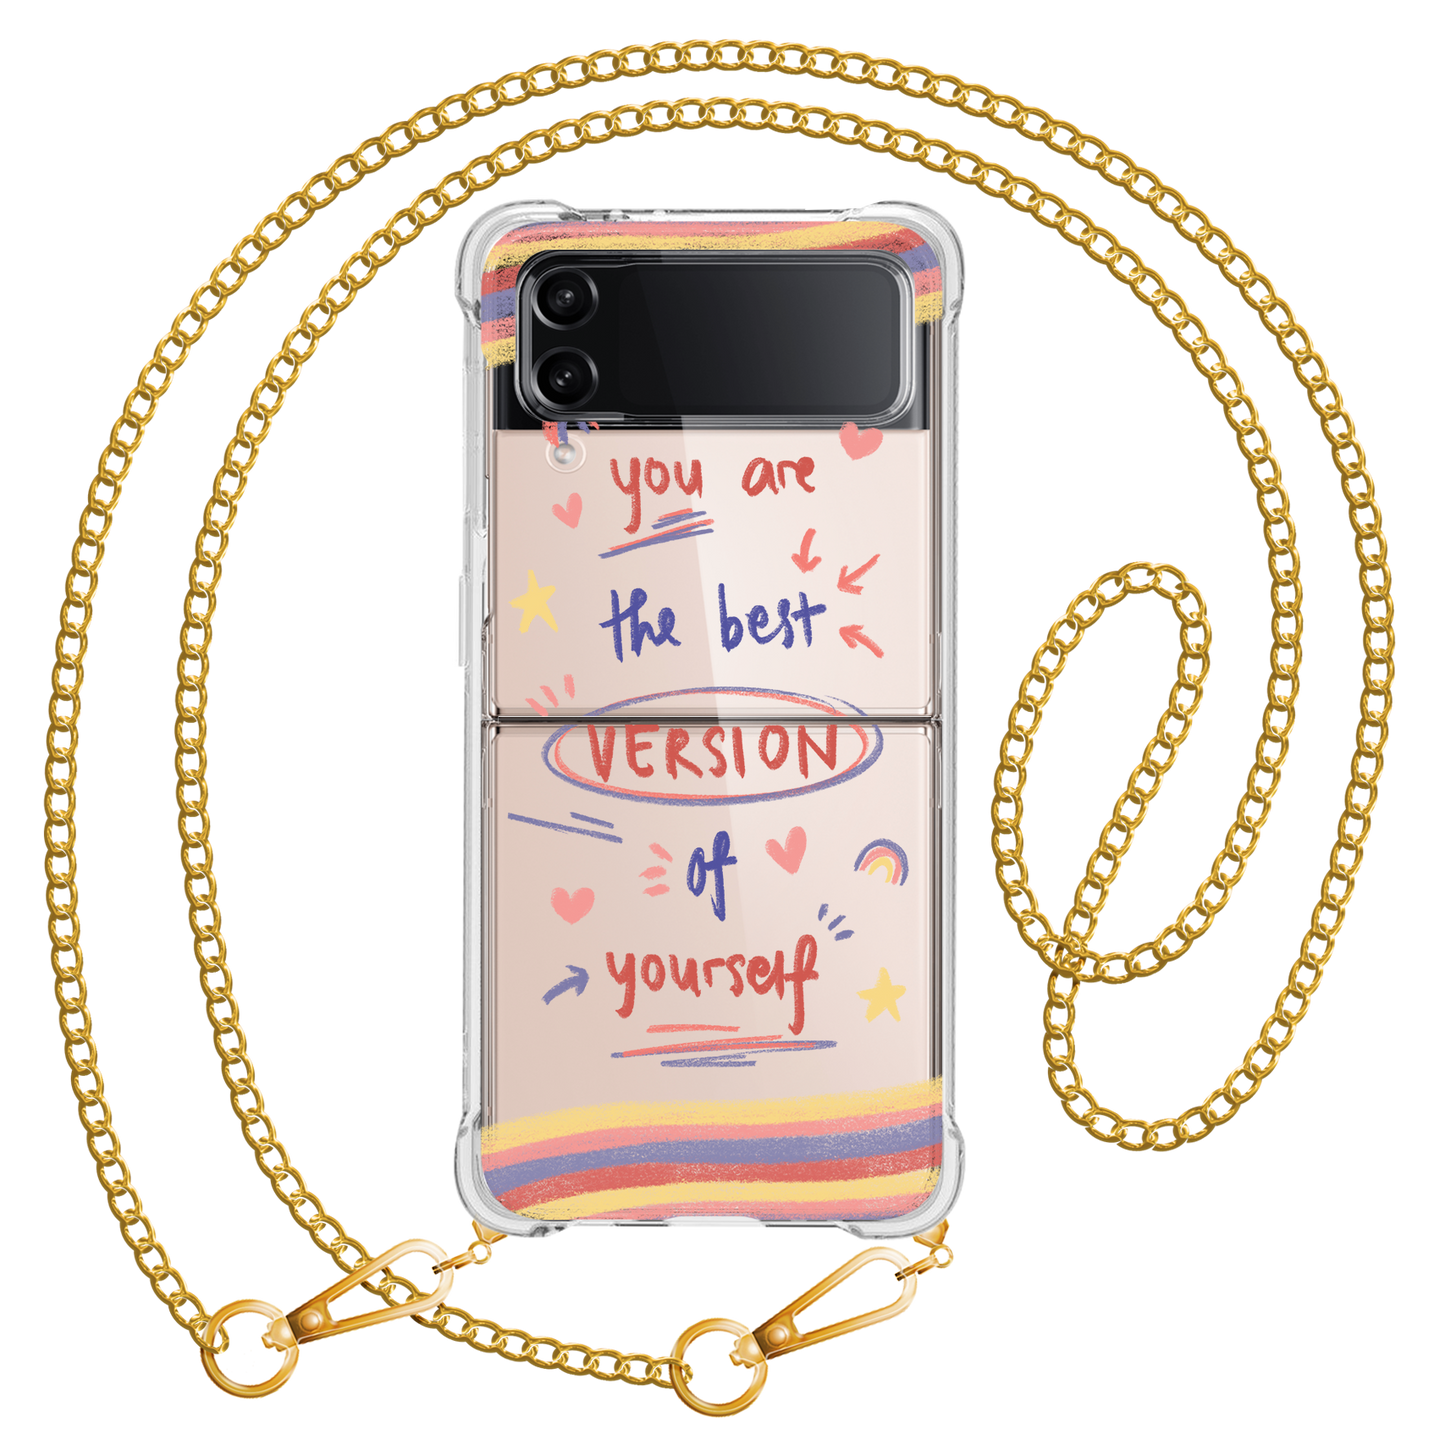 Android Flip / Fold Case - Love Yourself